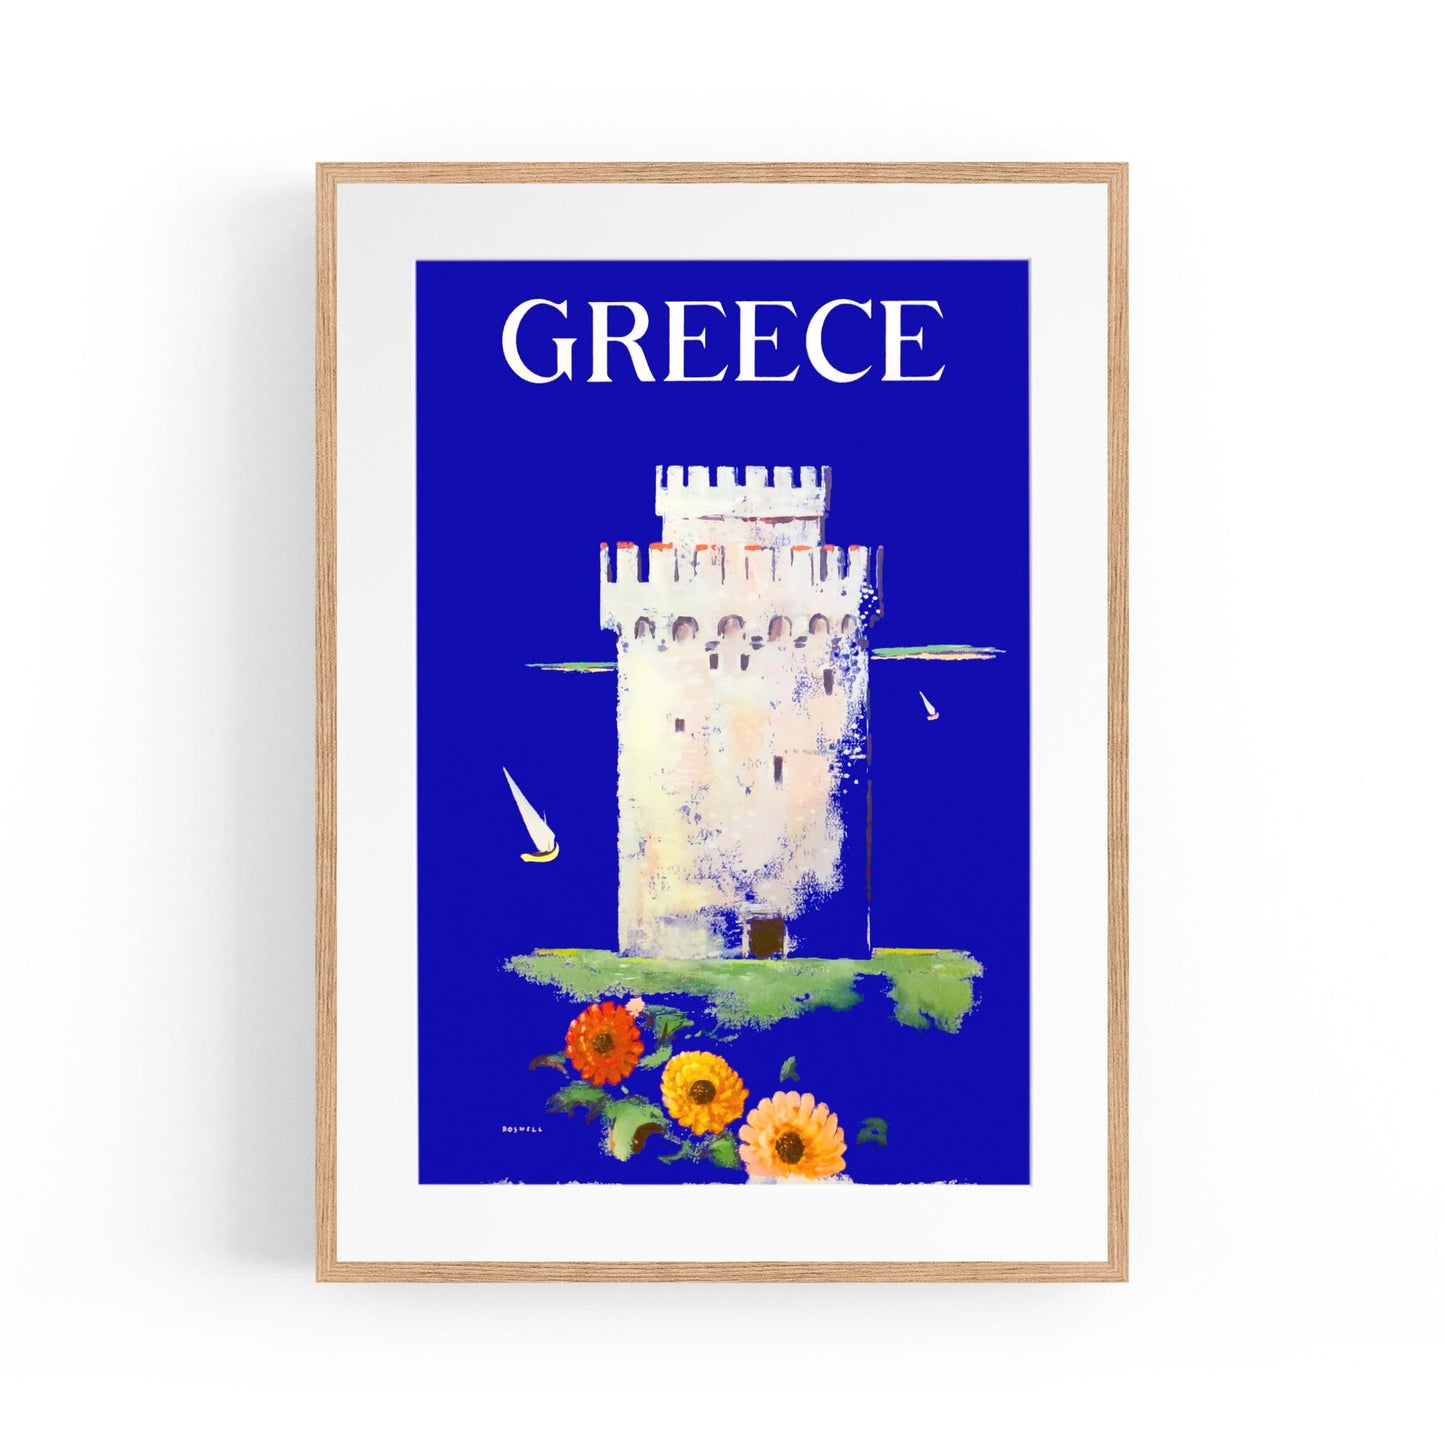 Salonica White Tower of Thessaloniki, Greece by Boswell | Framed Vintage Travel Poster